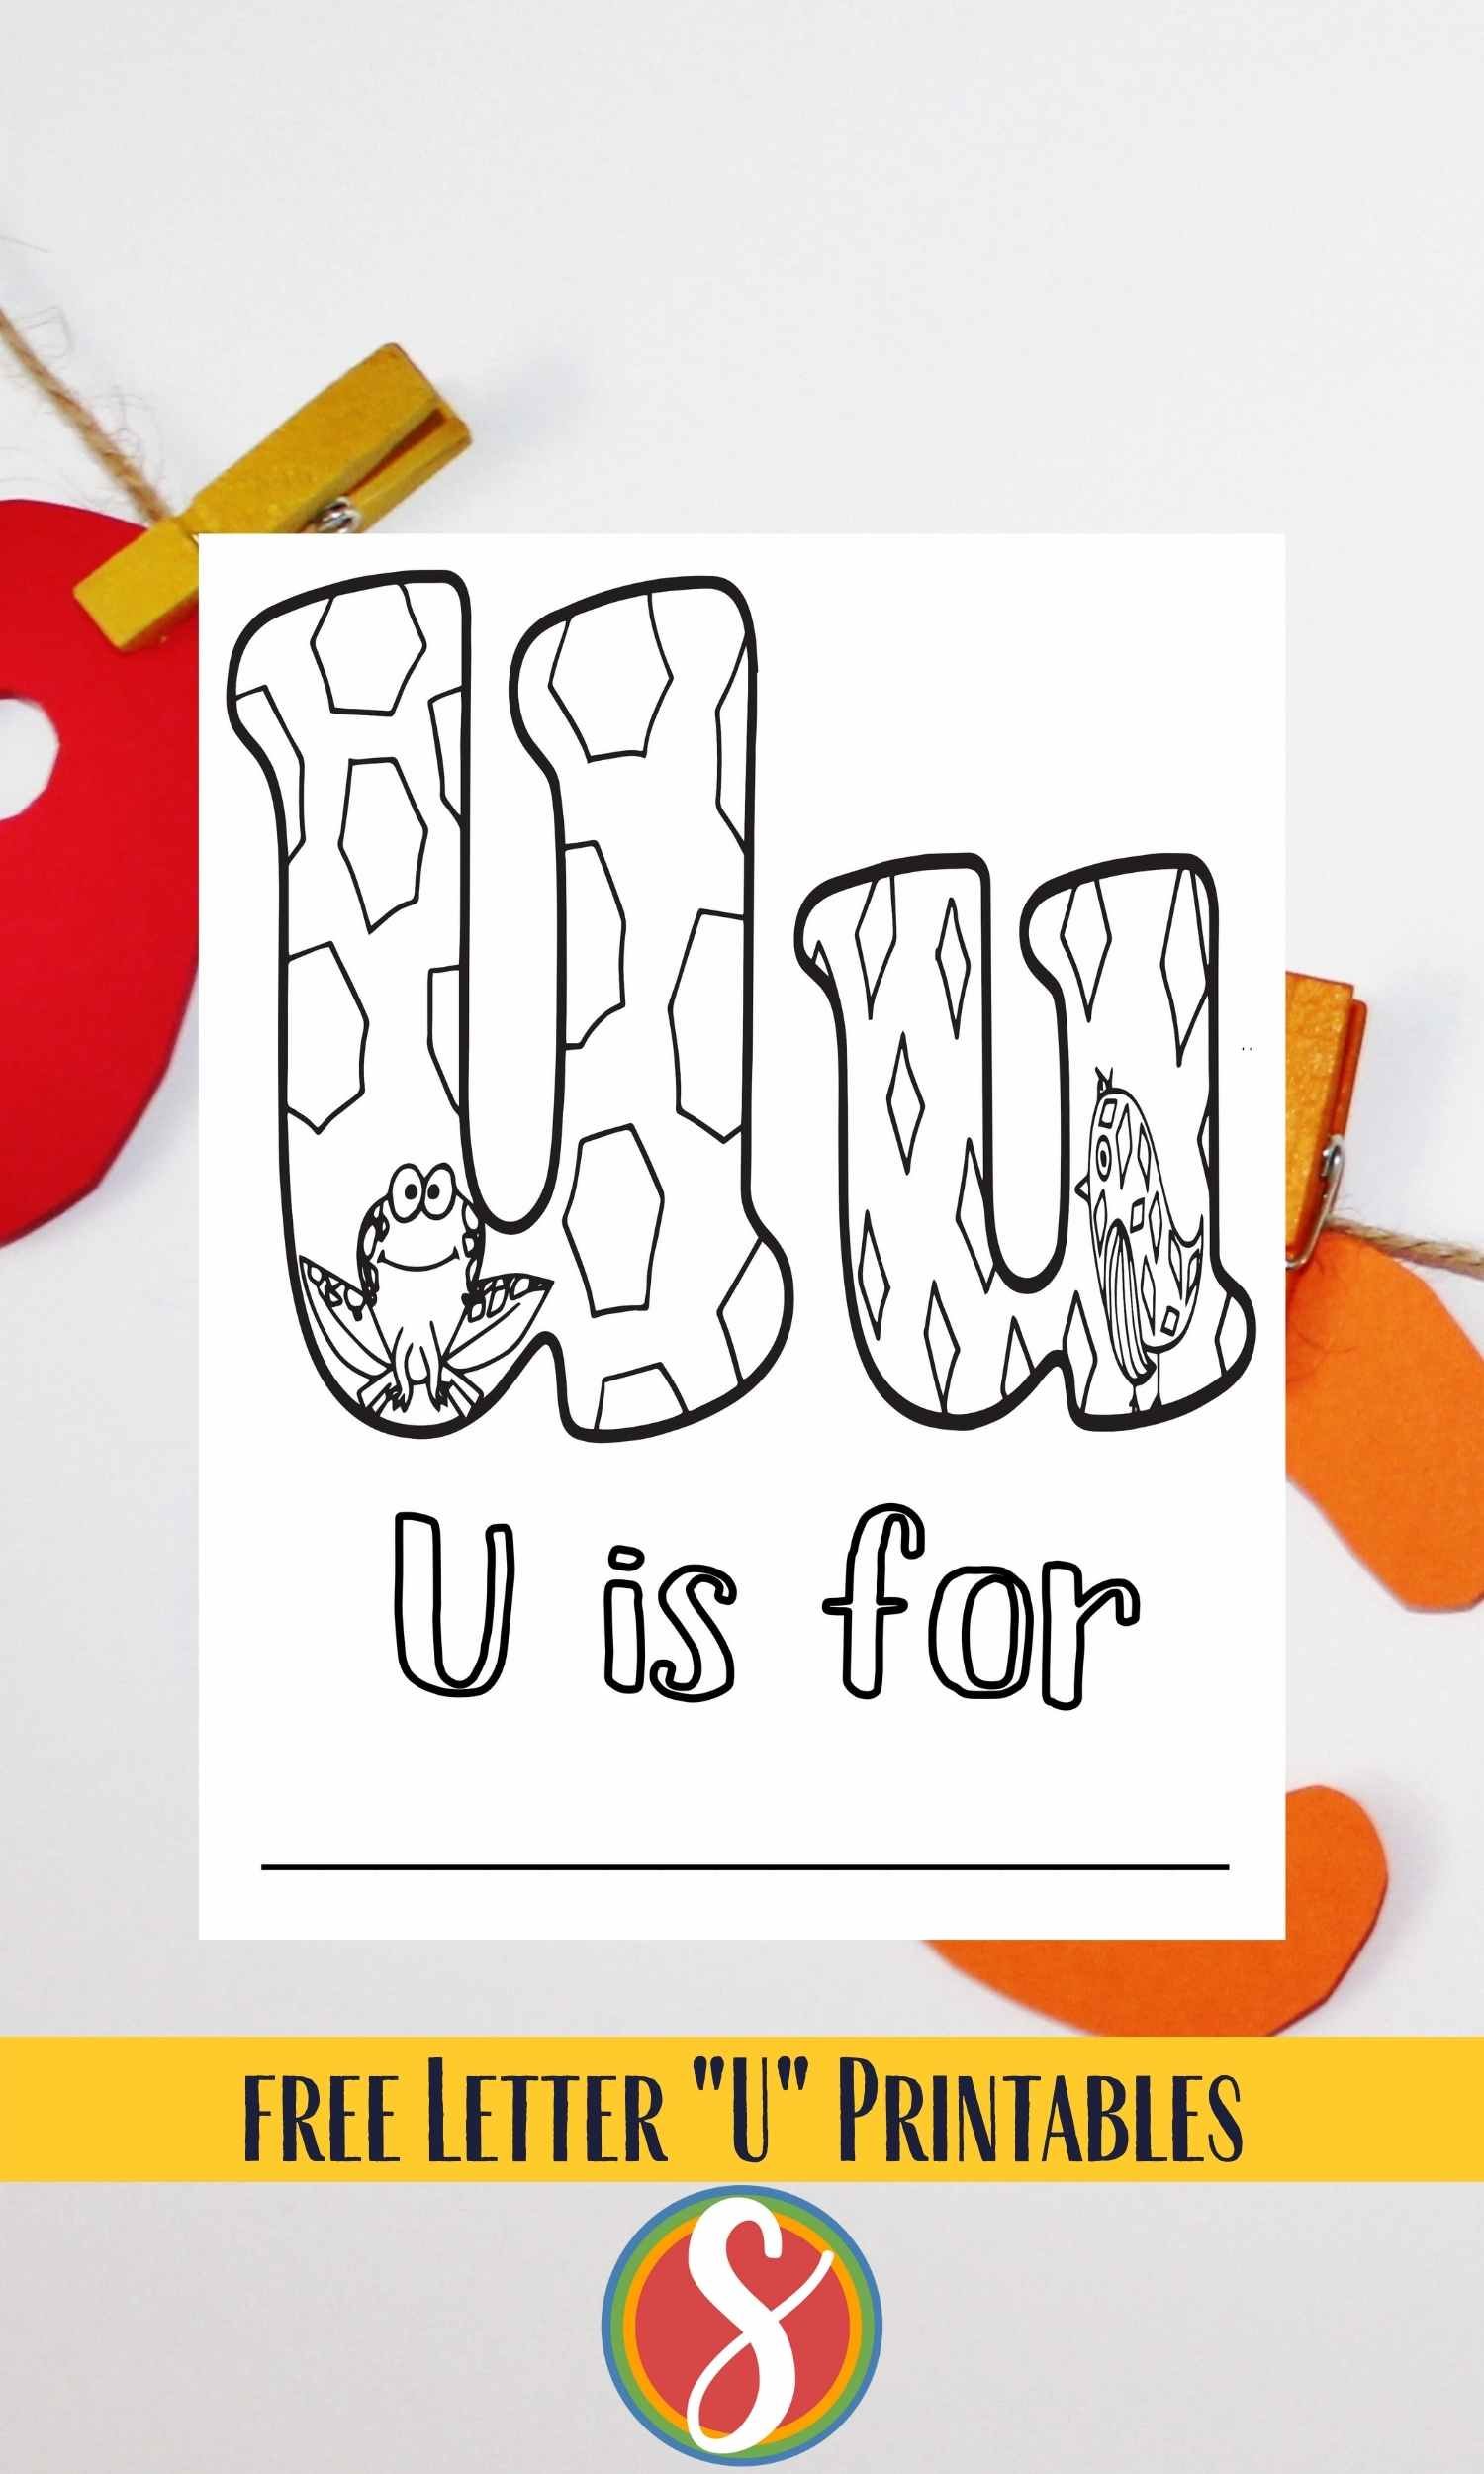 Bubble letters "Uu" with animals inside to color